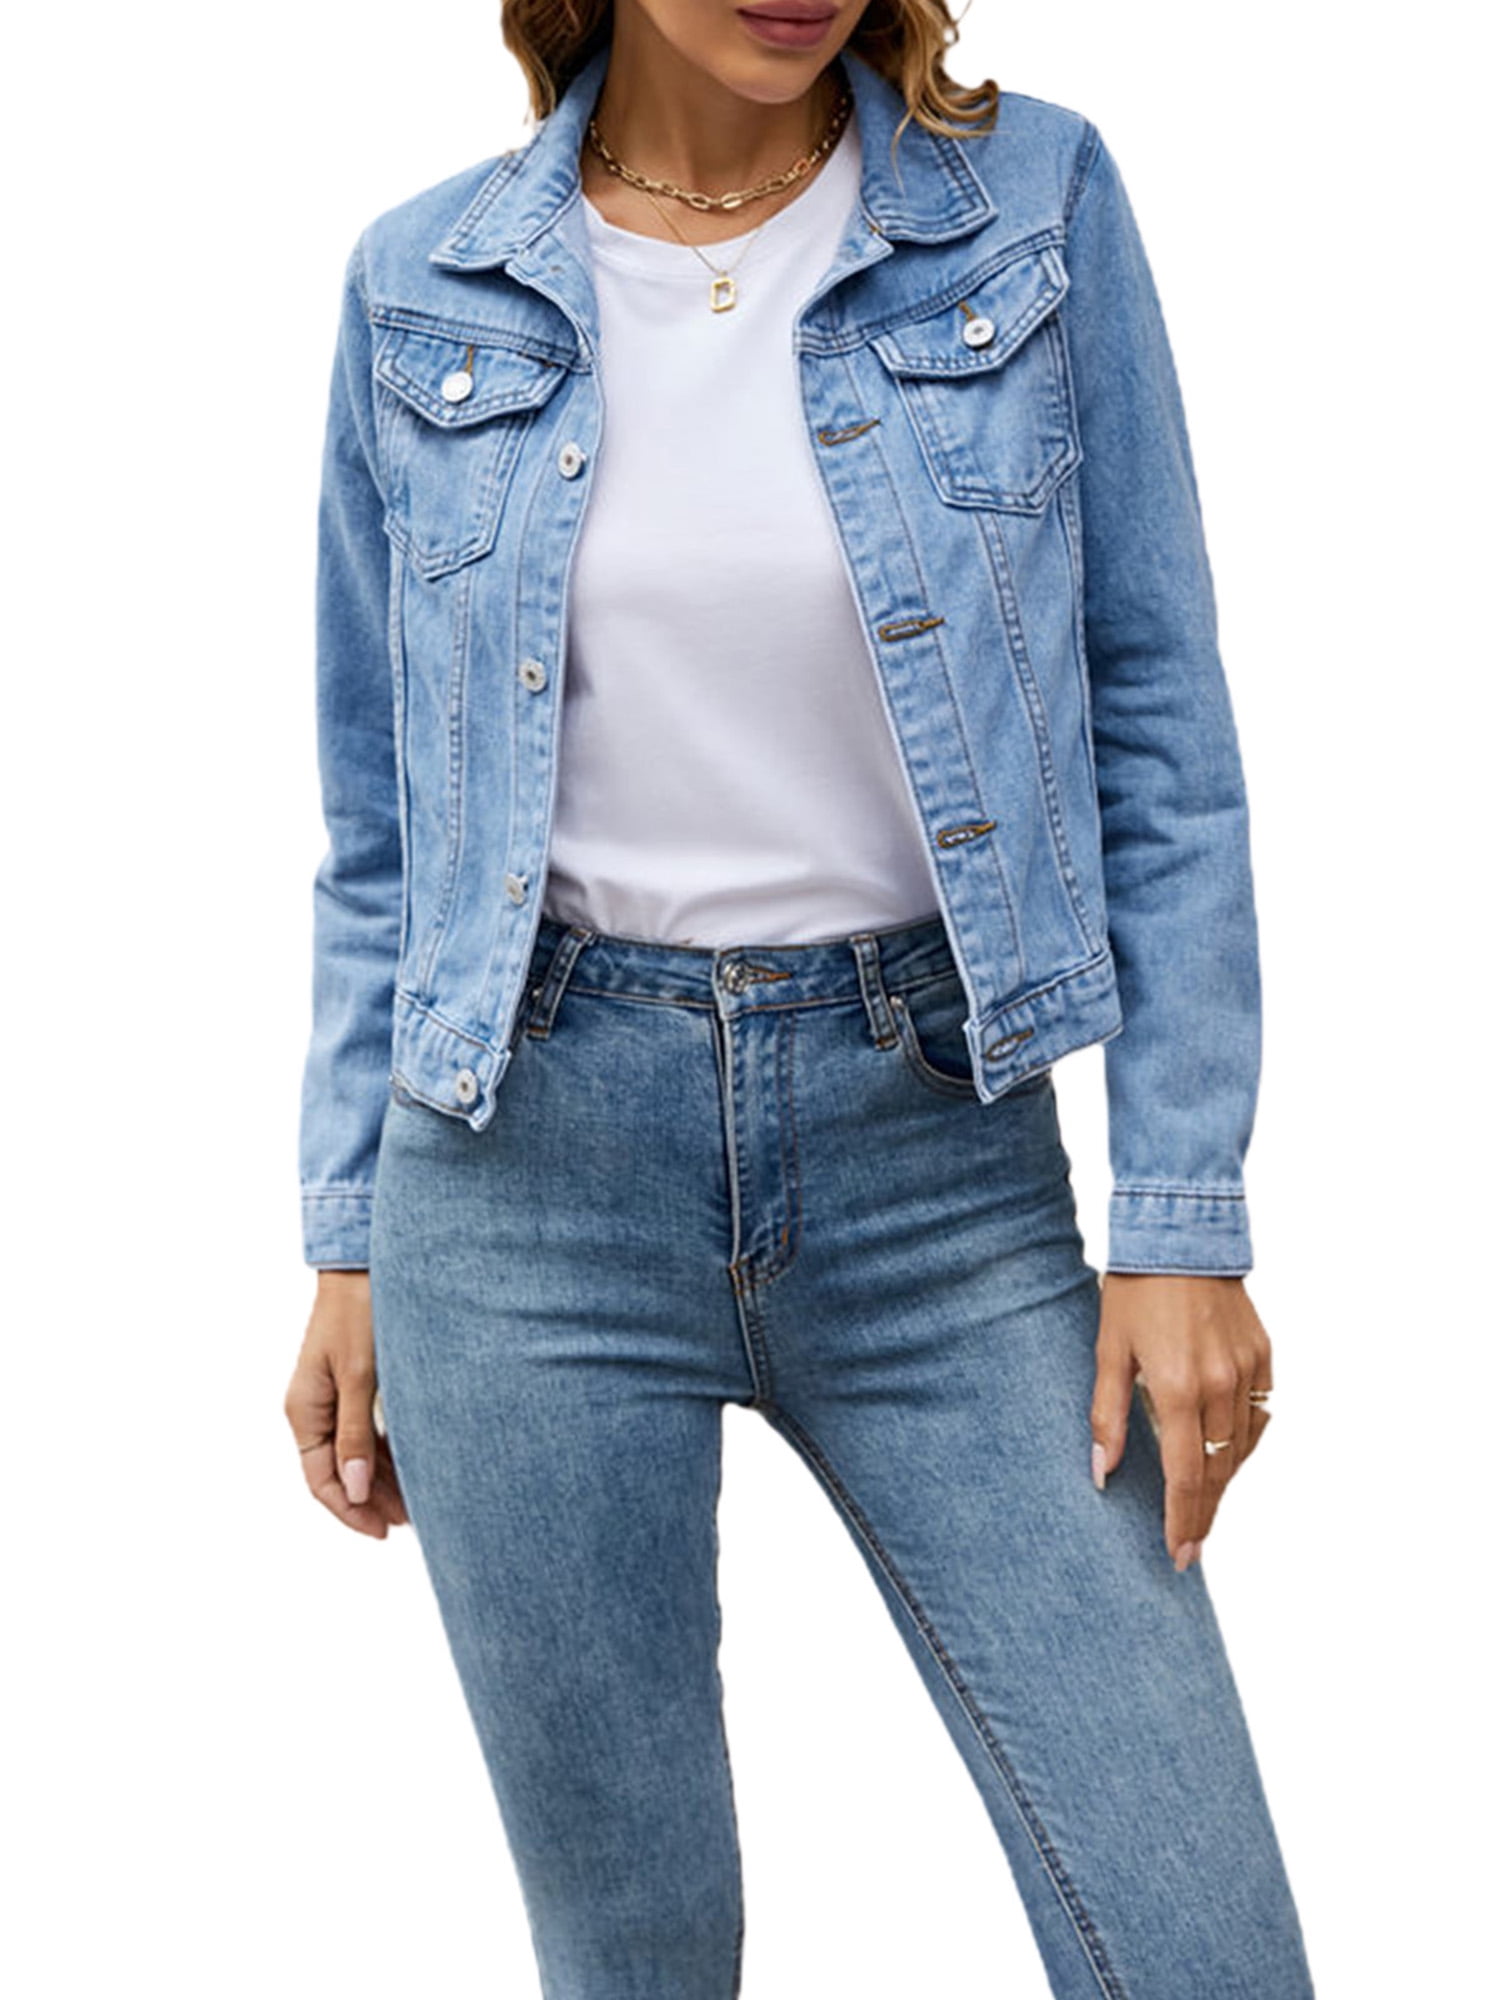 Women's Basic Button Down Stretch Fitted Long Sleeves Denim Jean Jacket -  Walmart.com